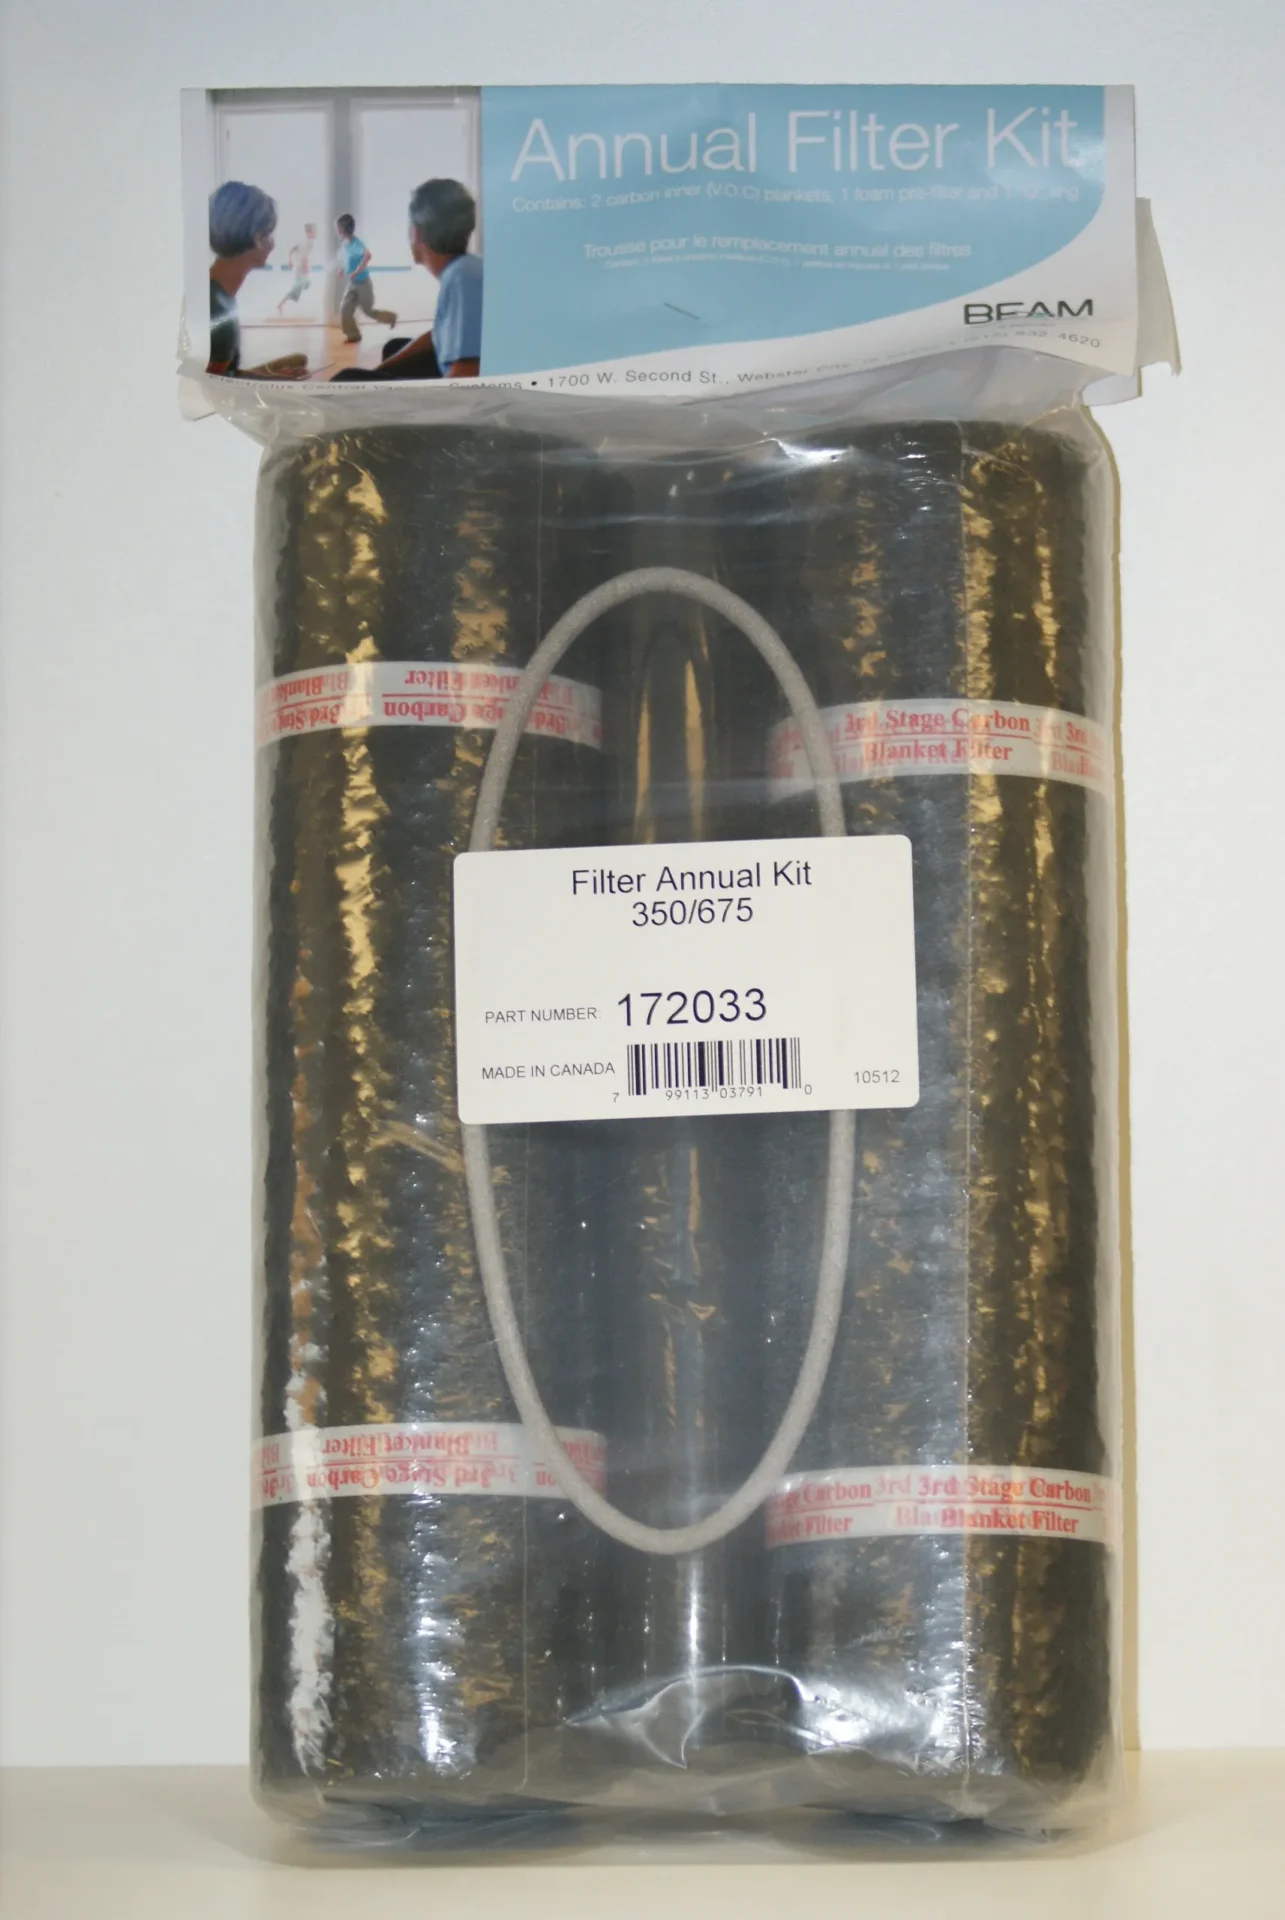 A tube of filter material is shown in its packaging.